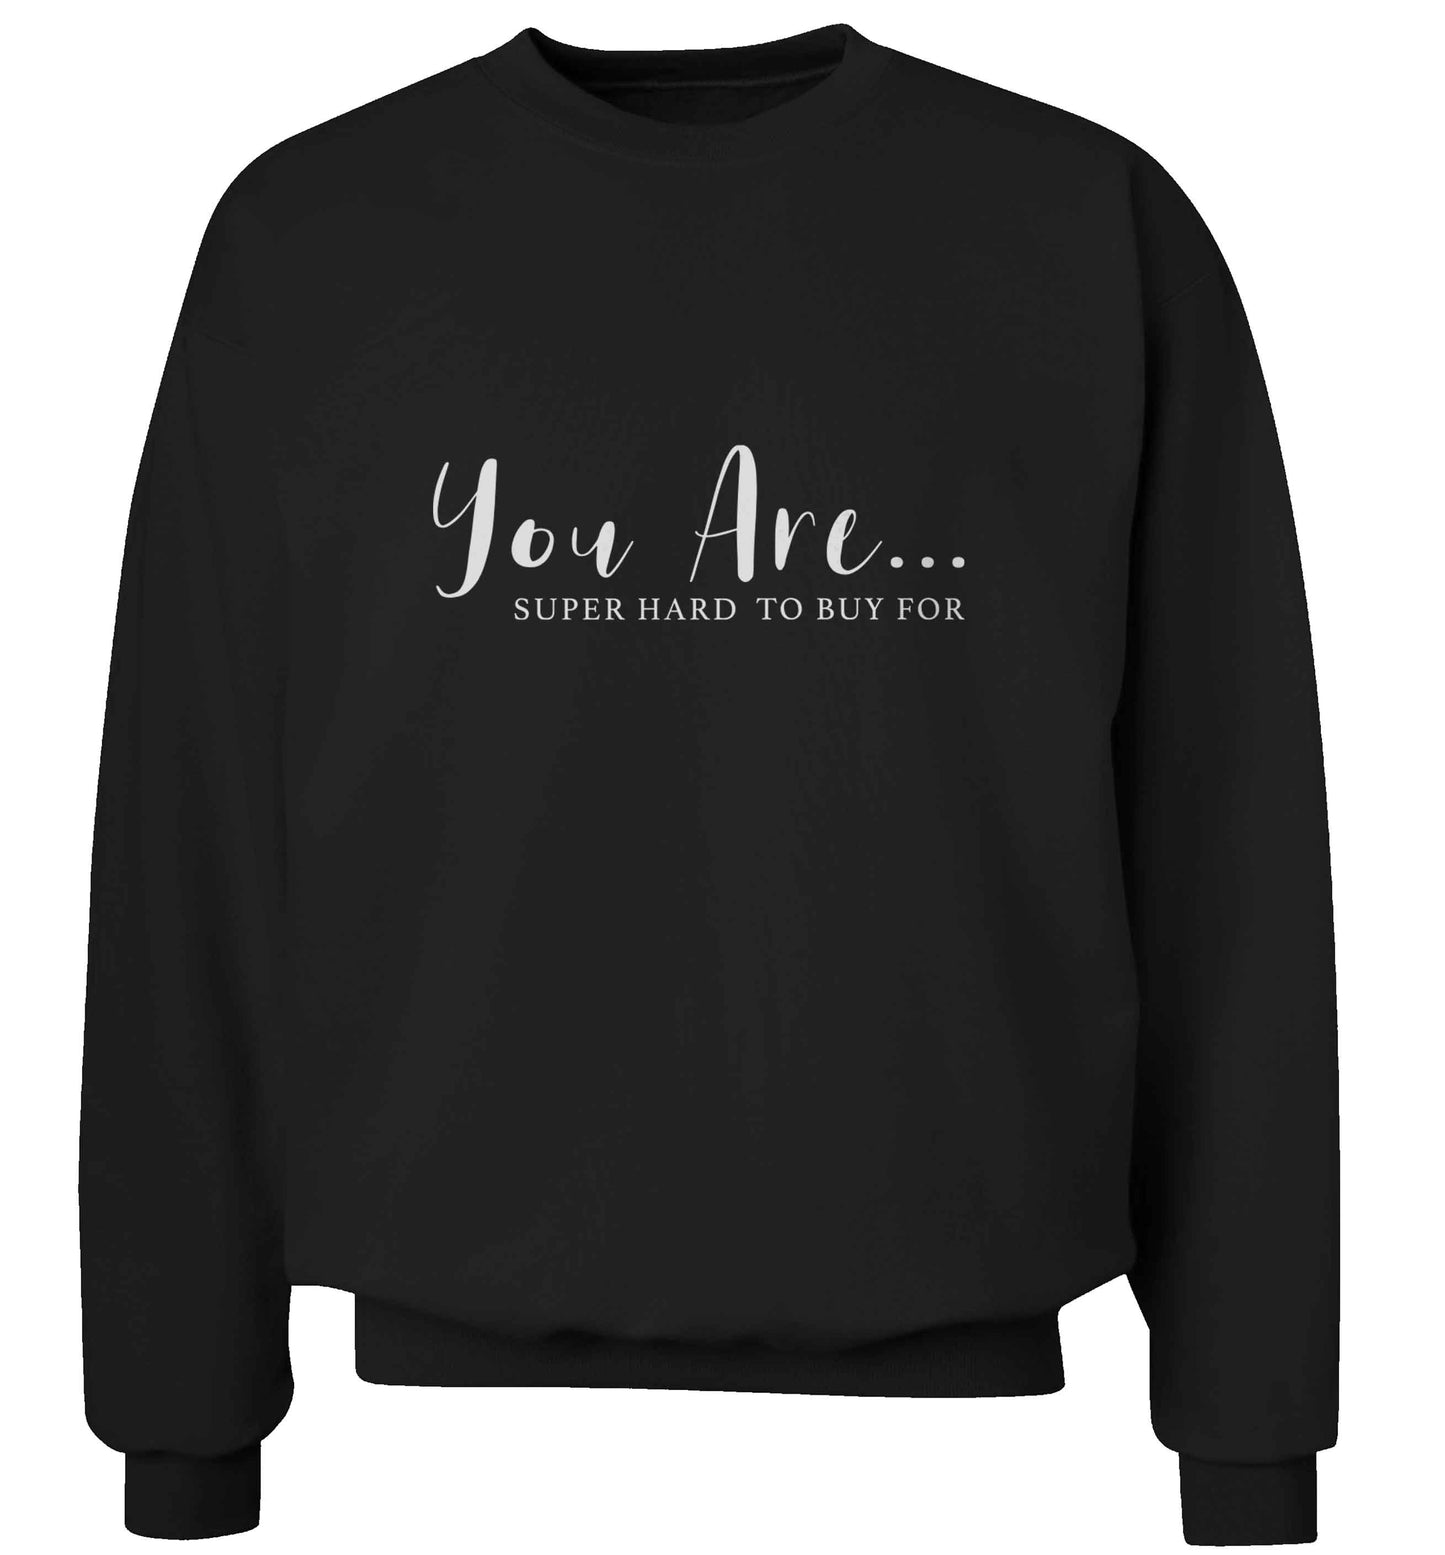 You are super hard to buy for adult's unisex black sweater 2XL